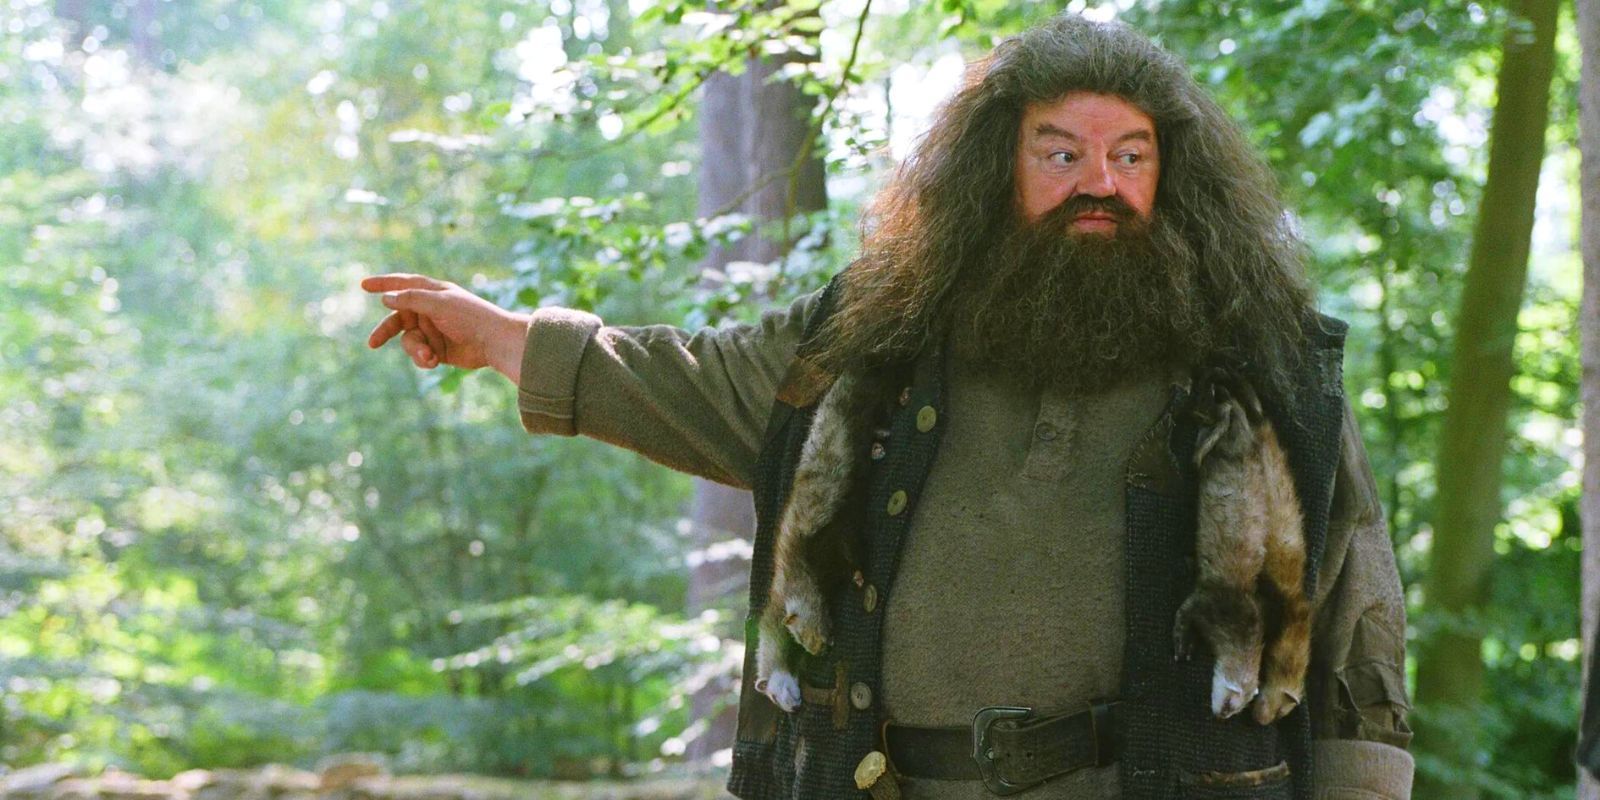 Robbie Coltrane as Hagrid pointing into a forest